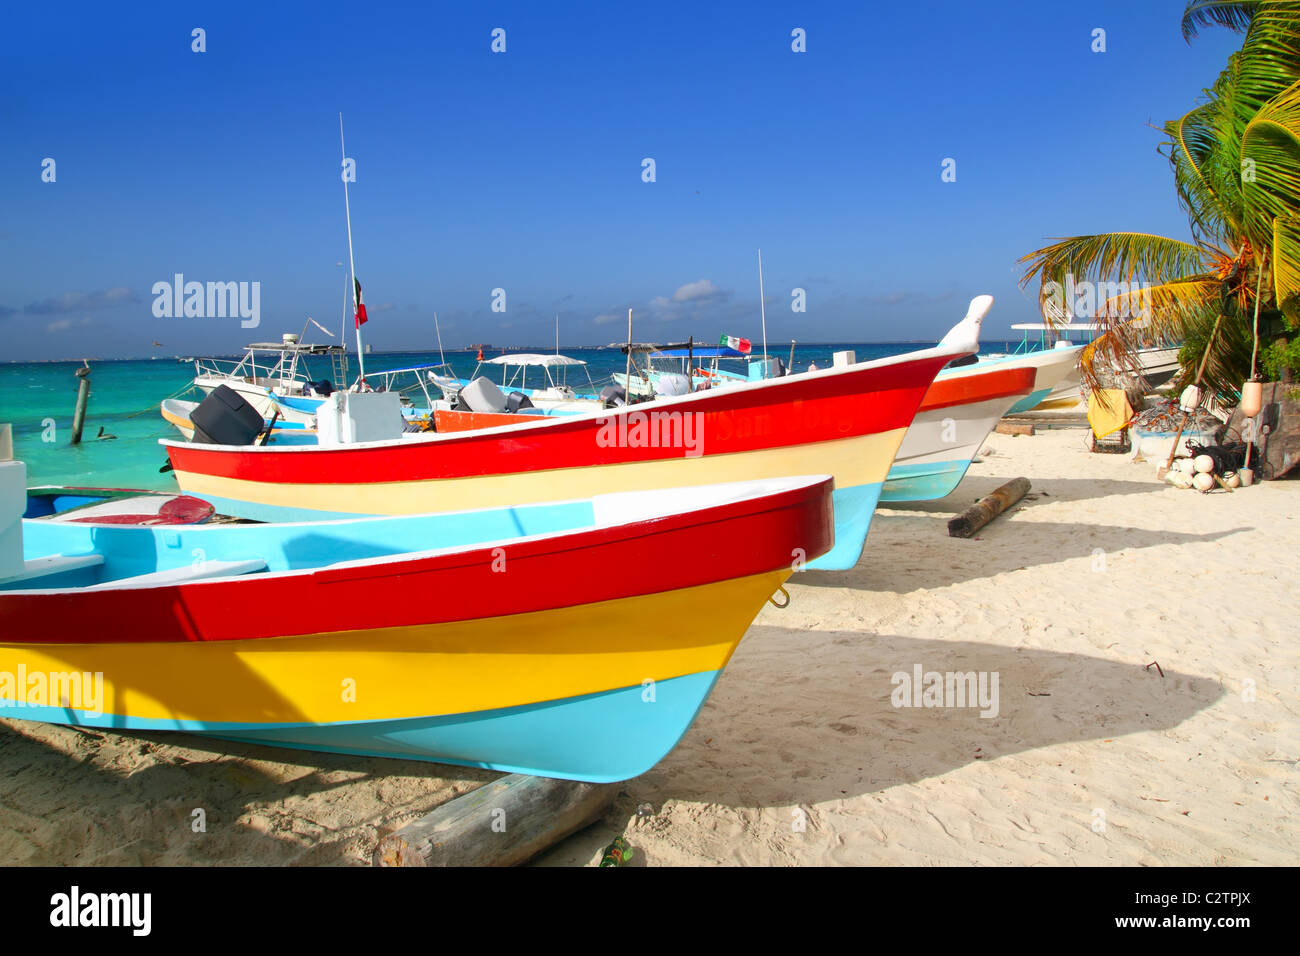 colorful tropical boats beached in the sand Isla Mujeres Mexico Stock Photo